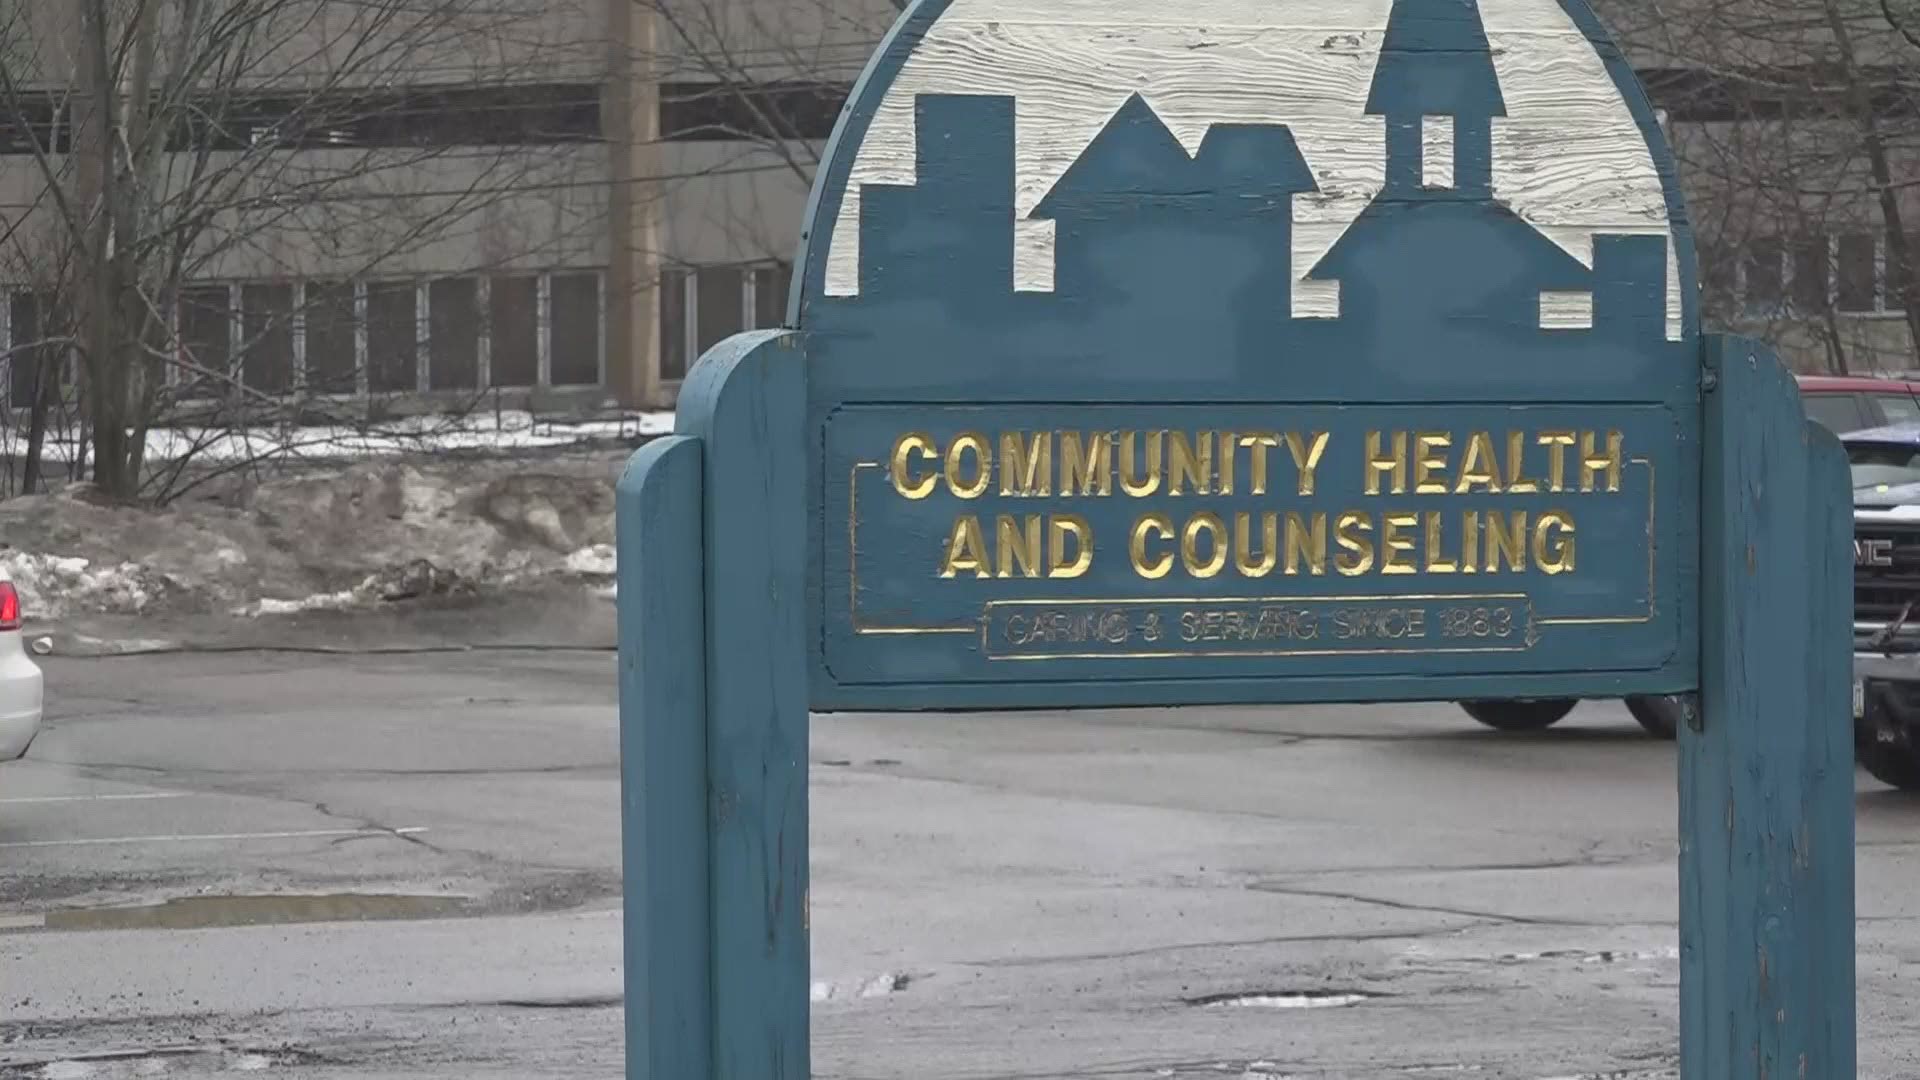 Community Health and Counseling Services in Bangor and Sweetser will use this money to develop Certified Community Behavioral Health Clinics to expand services.